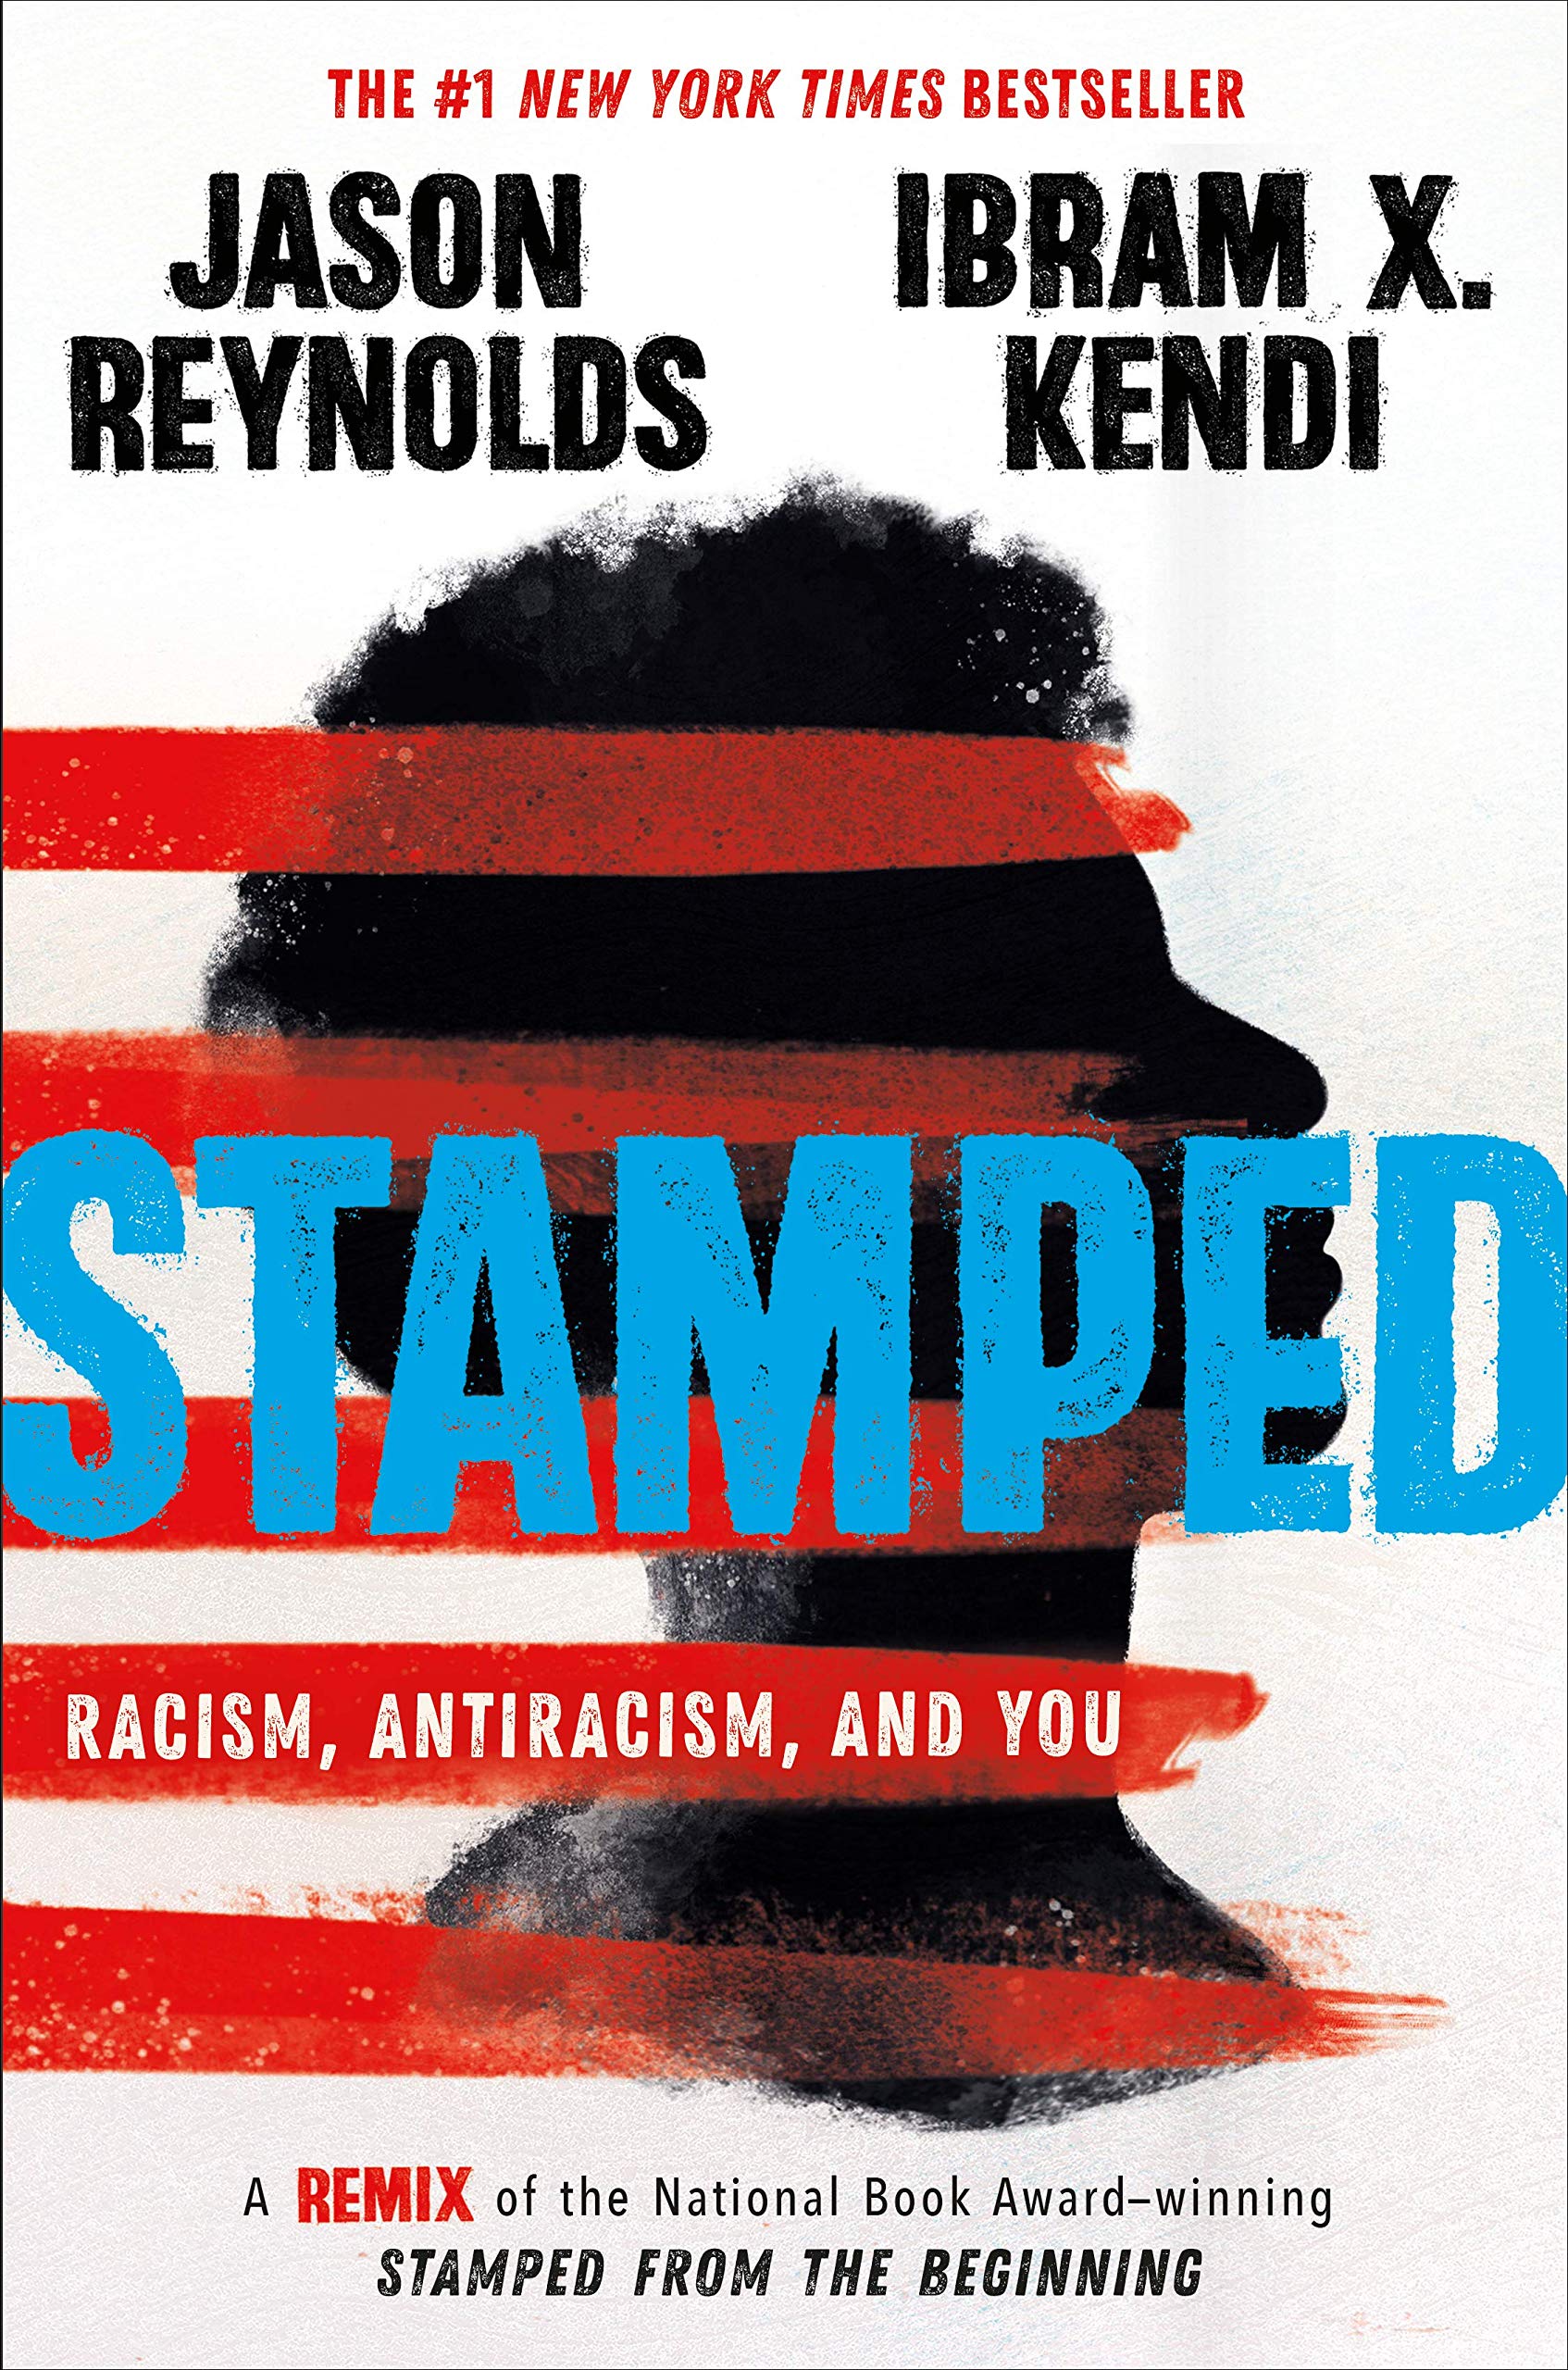 Stamped: Racism, Antiracism, and You by Jason Reynolds